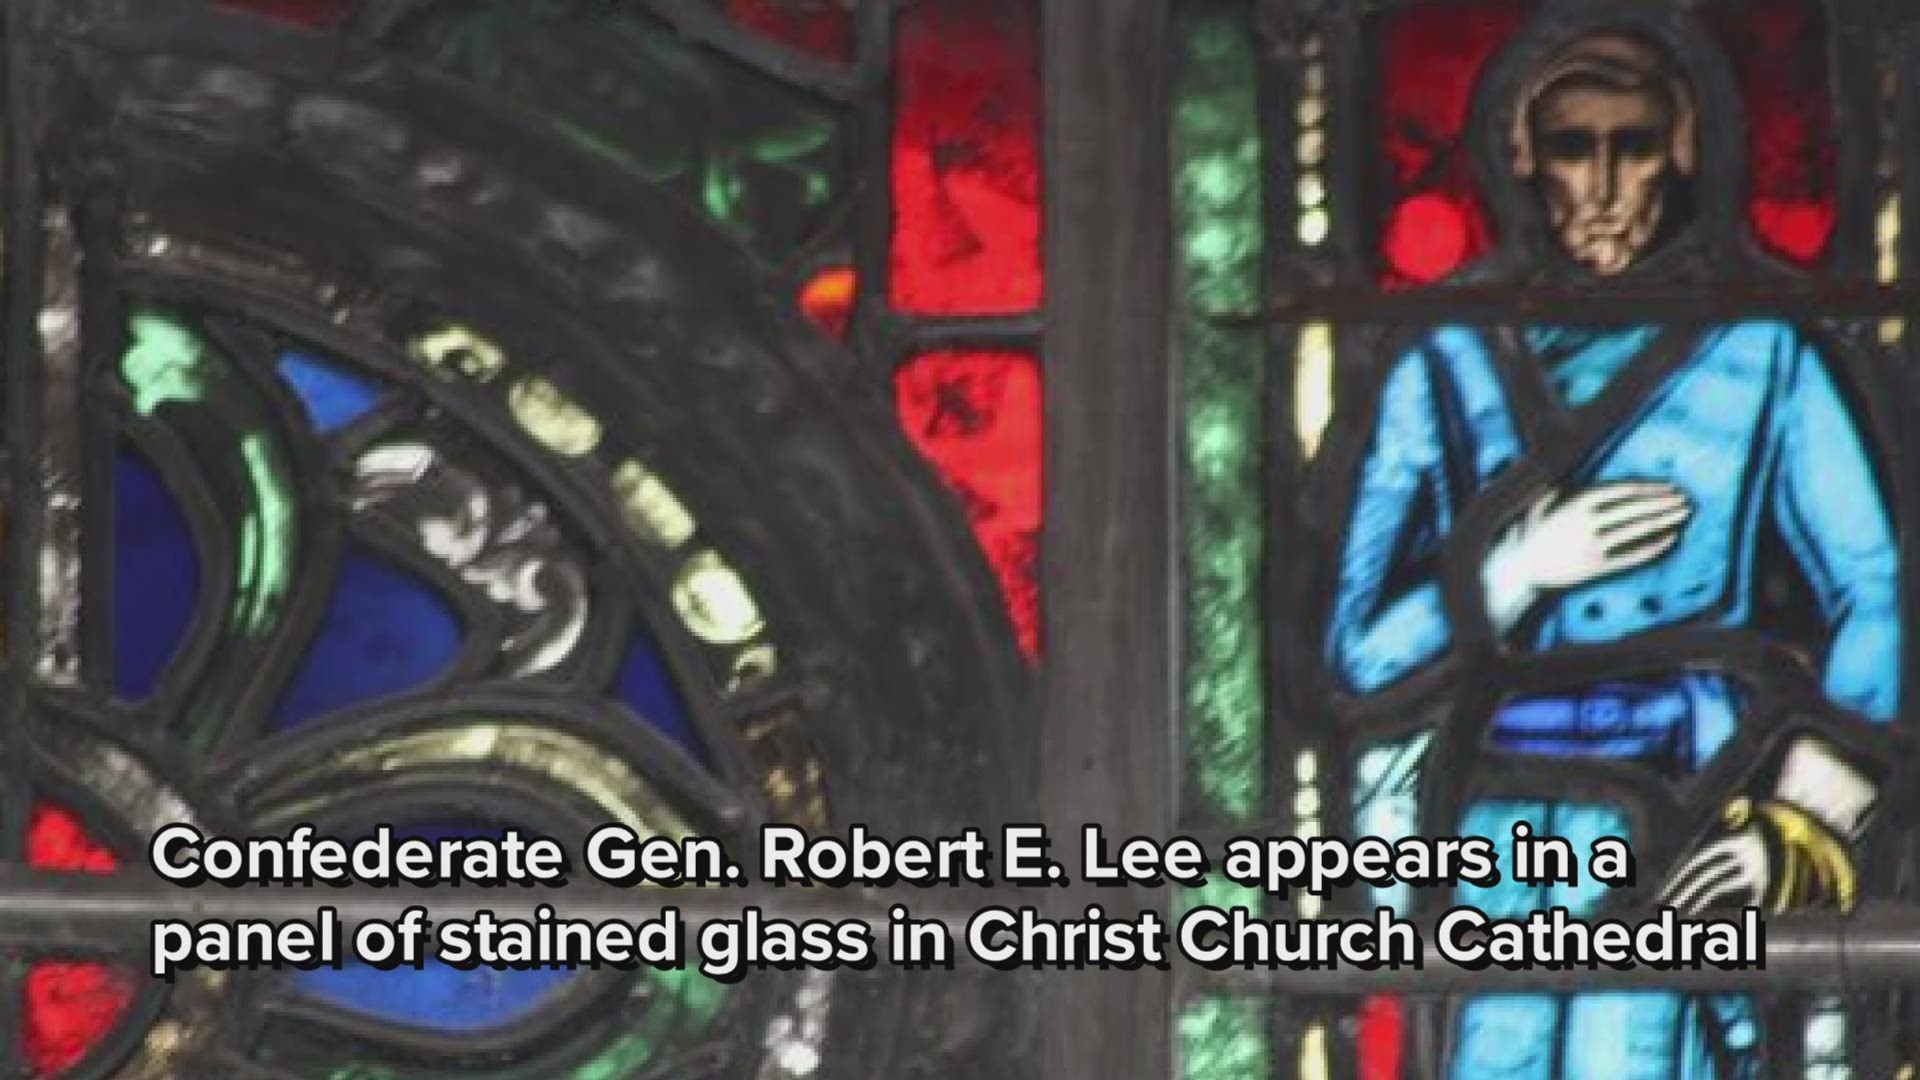 A year after Charlottesville: Confederate symbols wear out welcome at Ohio cathedral